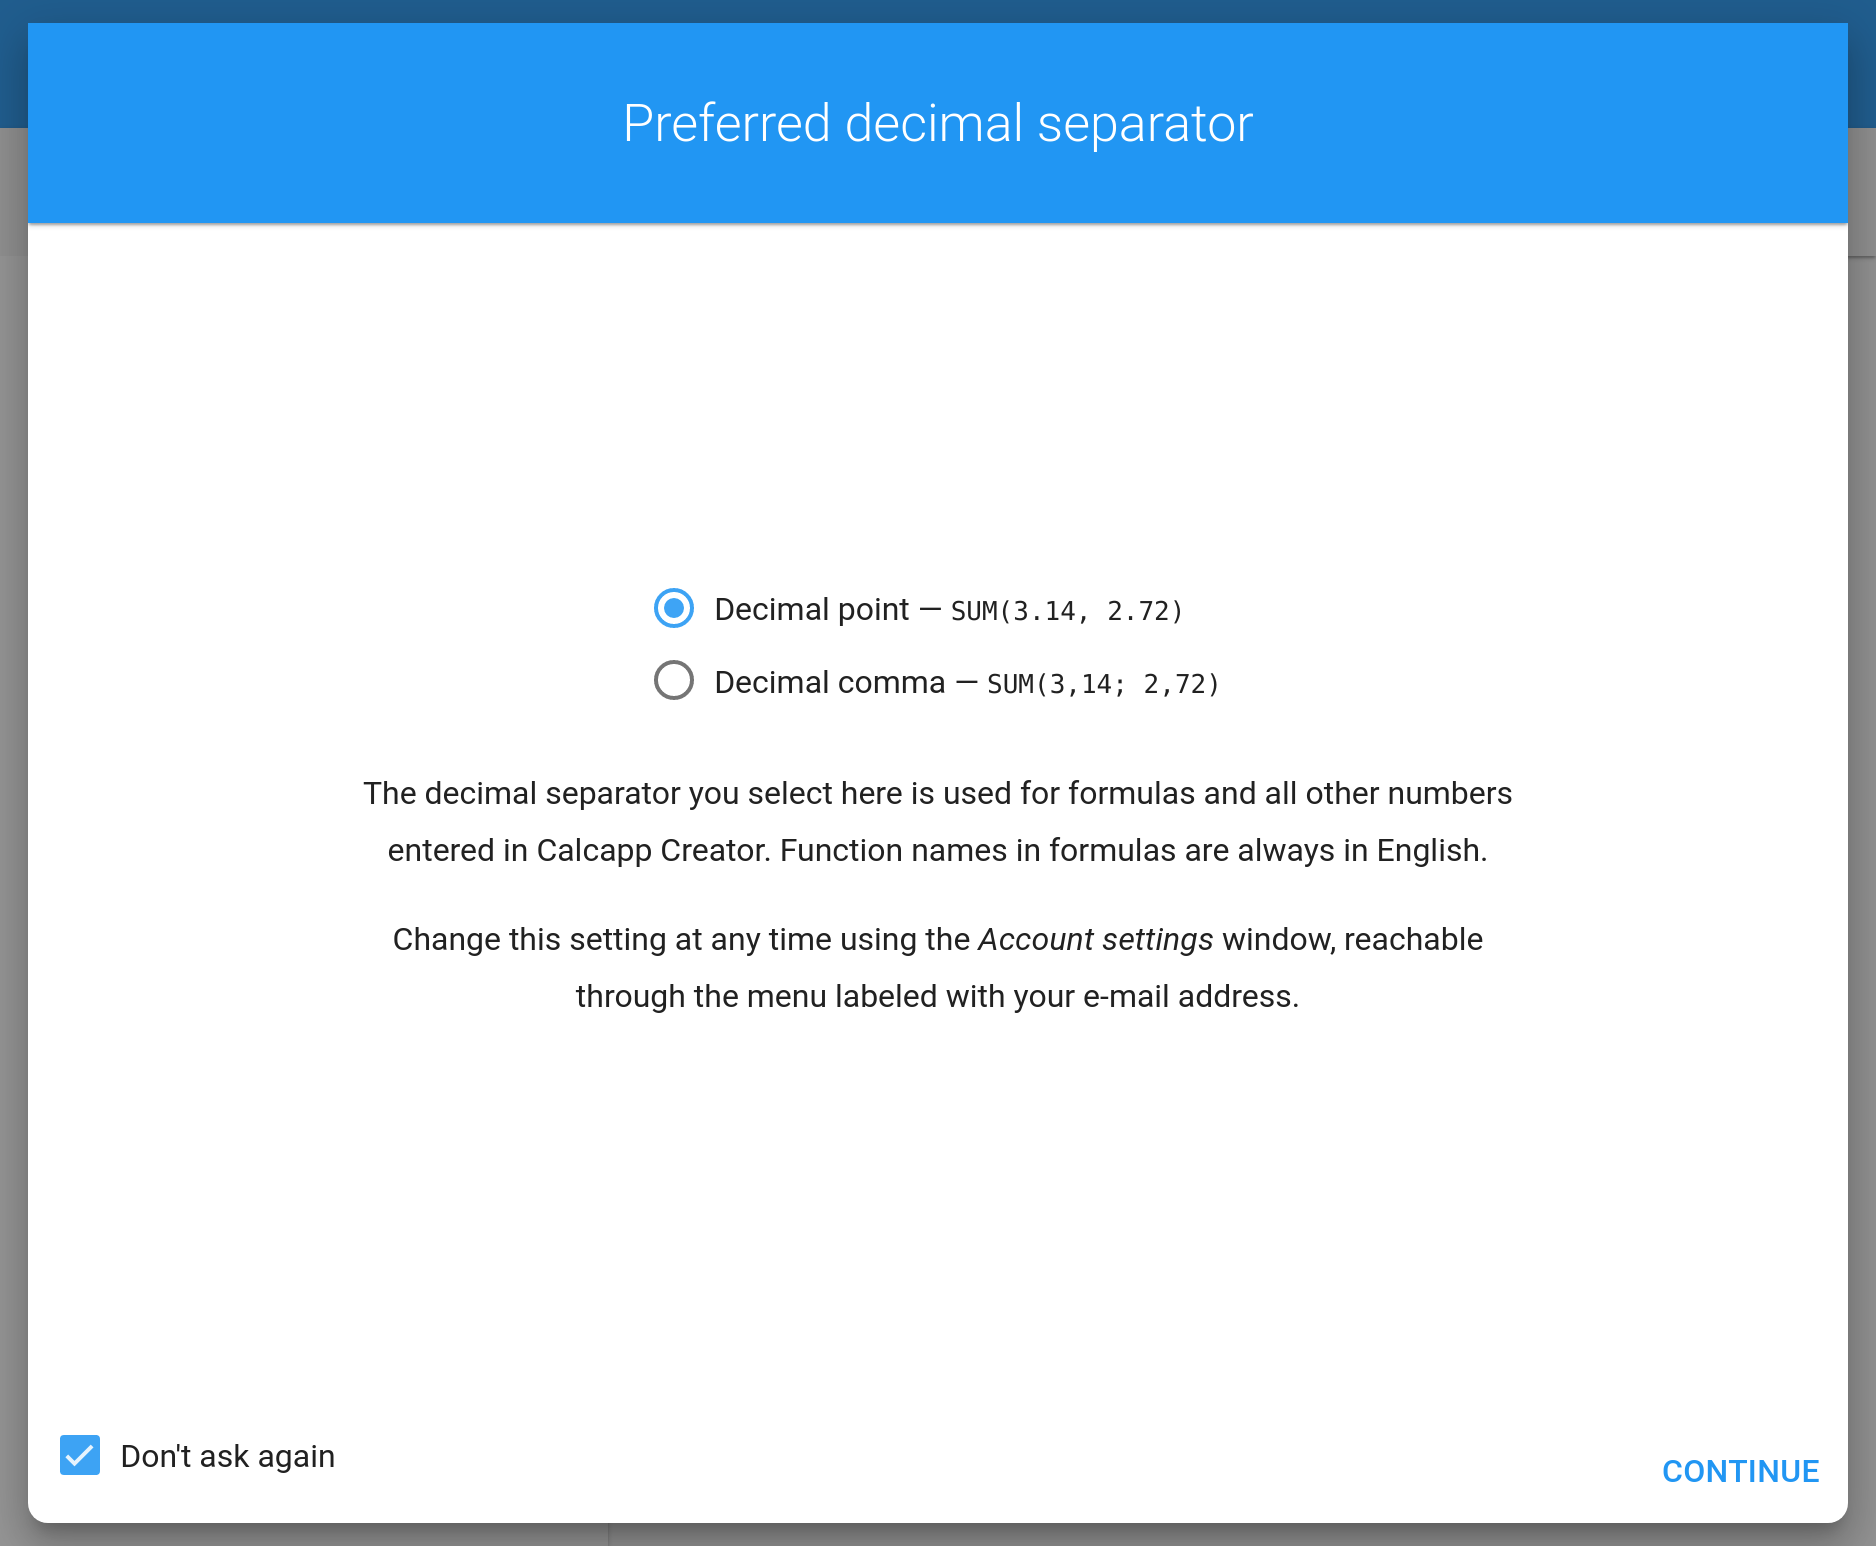 You get asked your decimal separator preference when you start Calcapp Creator